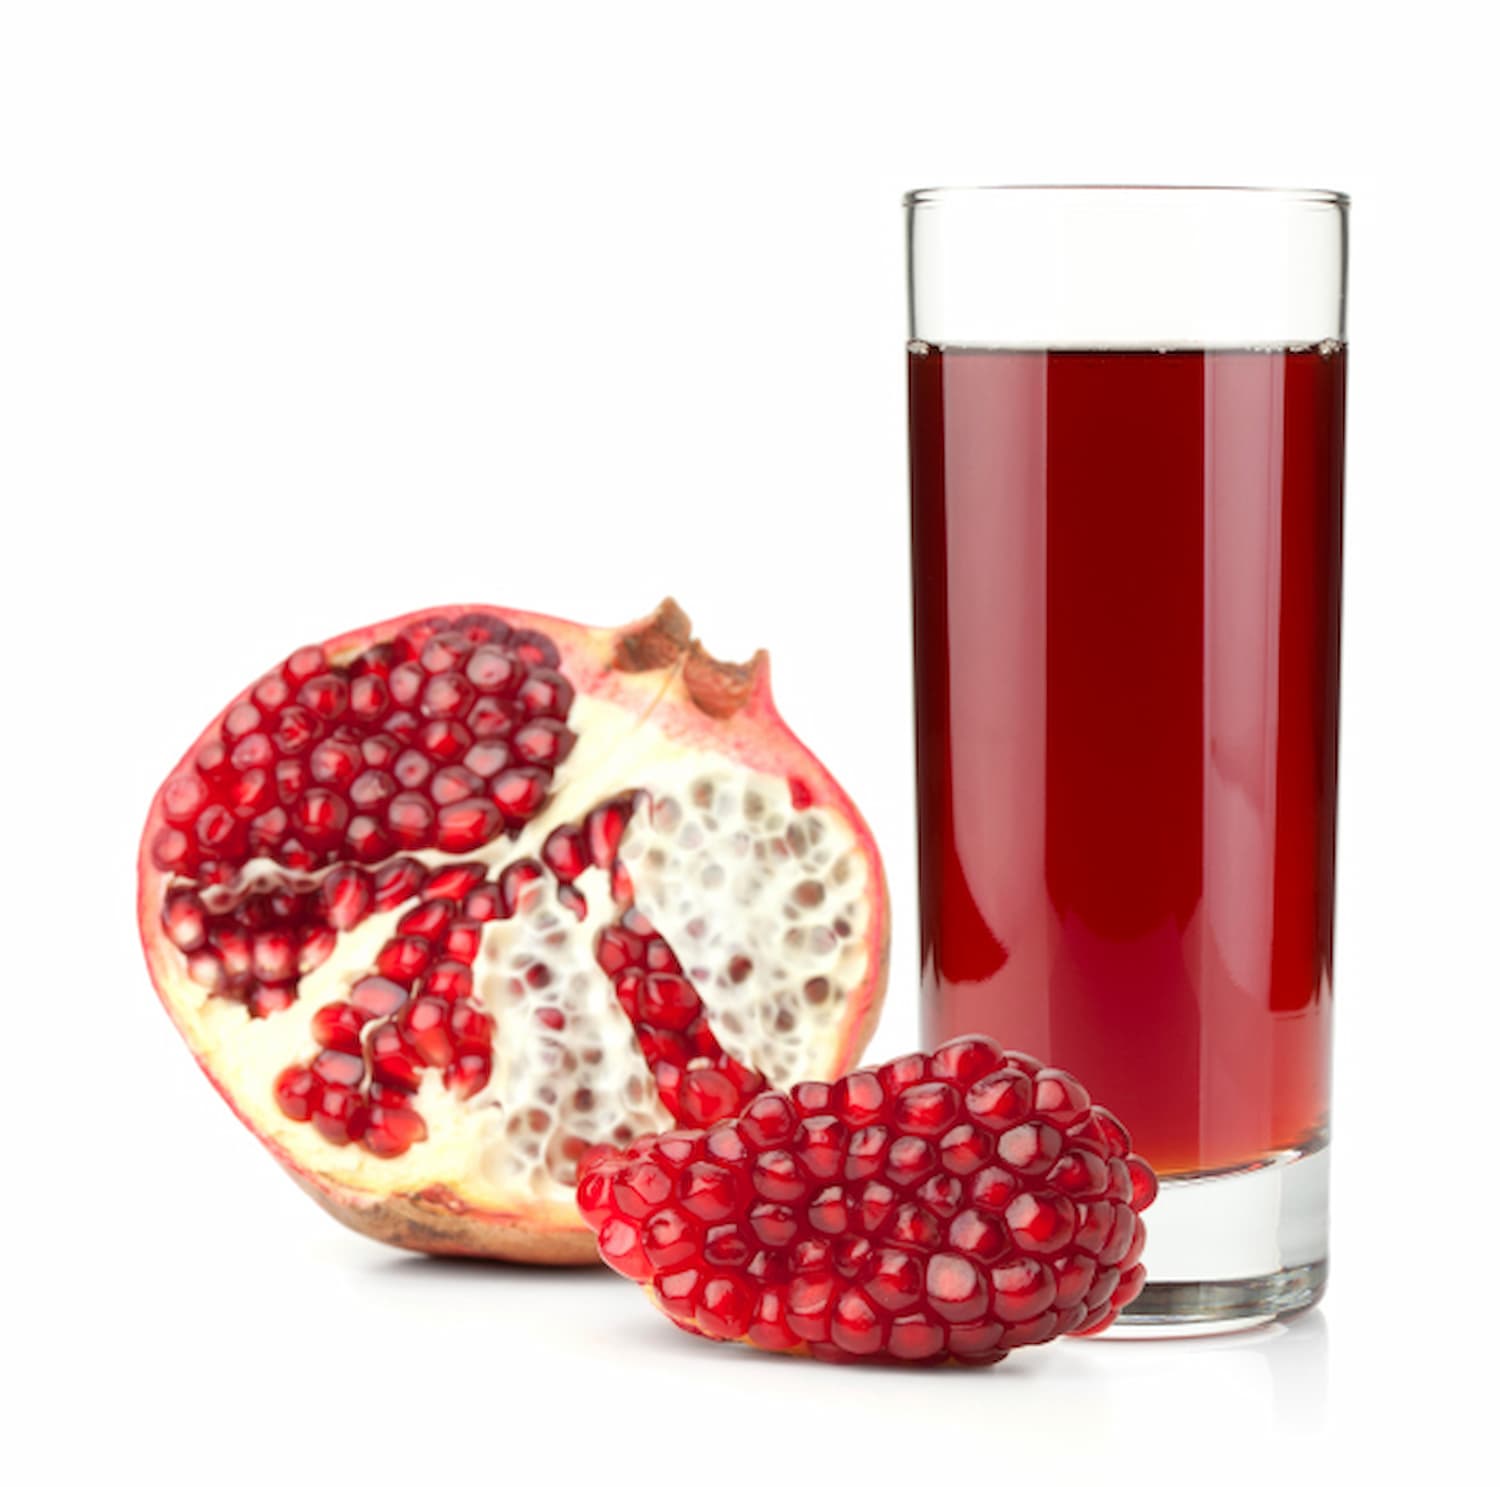 Why Drink Pomegranate Juice?